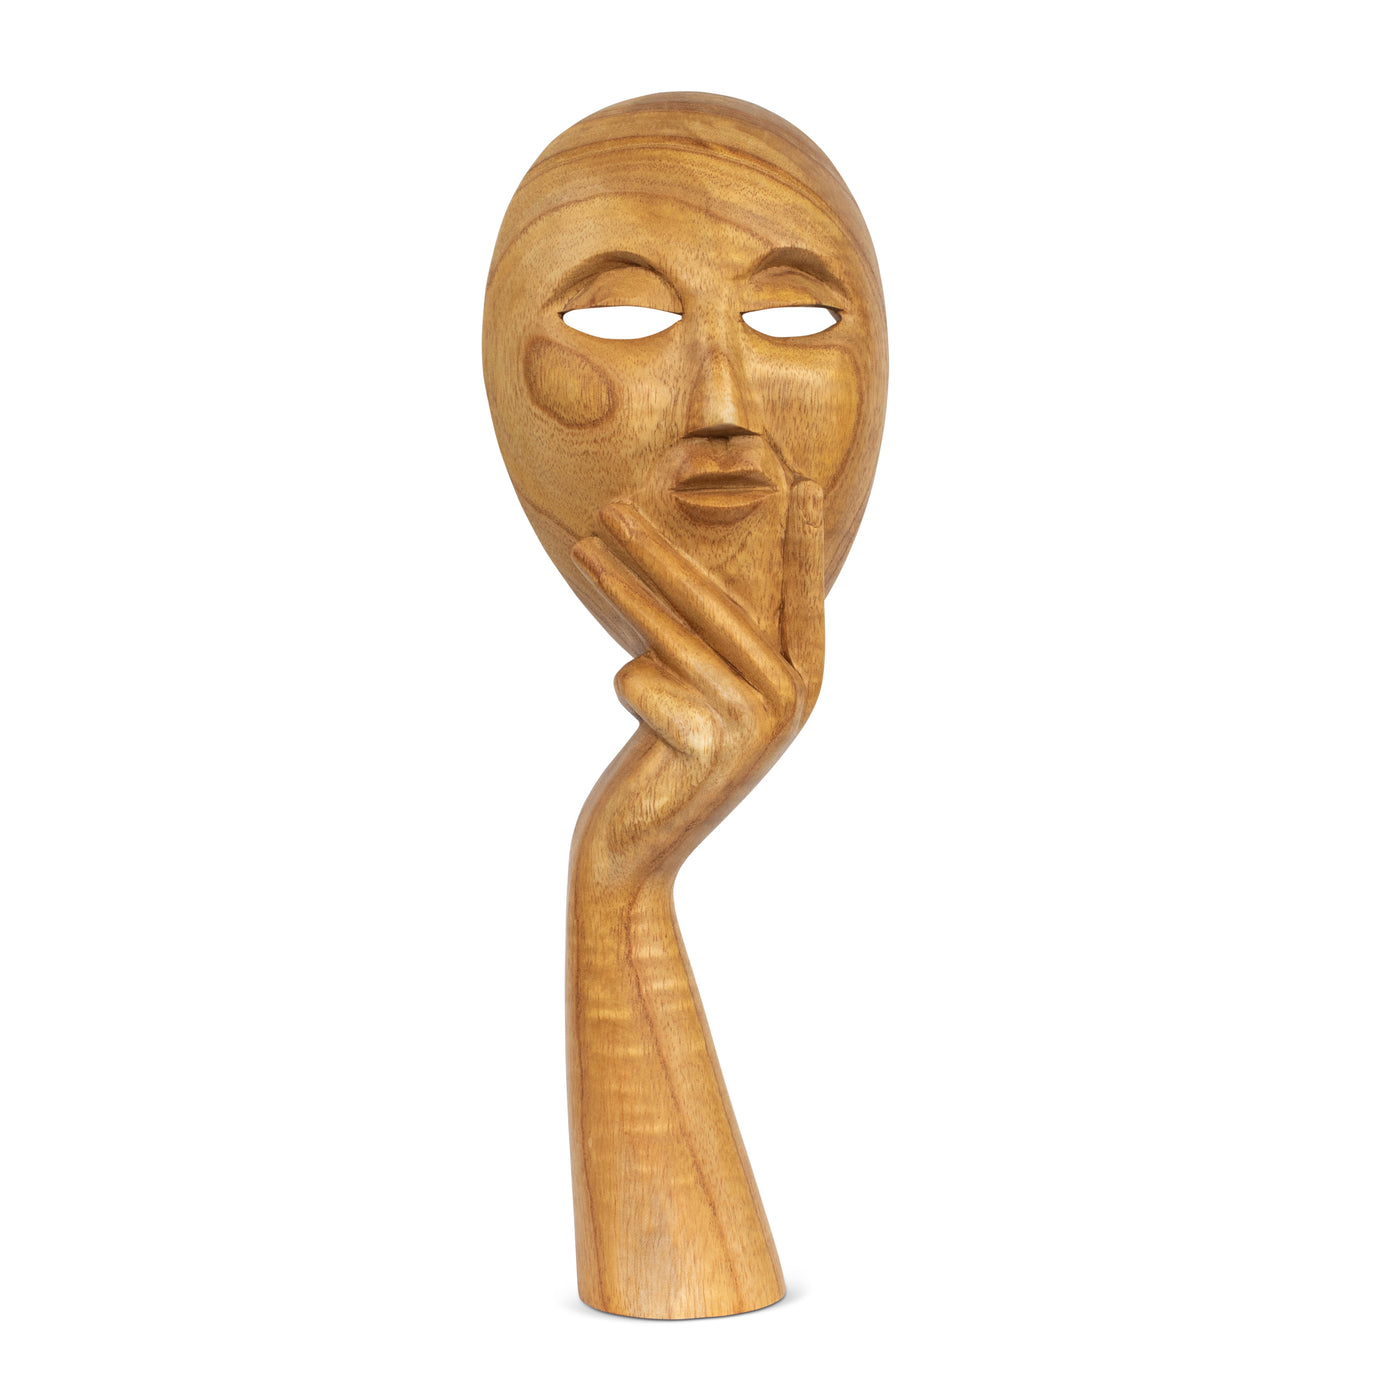 16" Wooden Hand Carved Abstract Thinking Mask Figurine Statue Sculpture Thinker